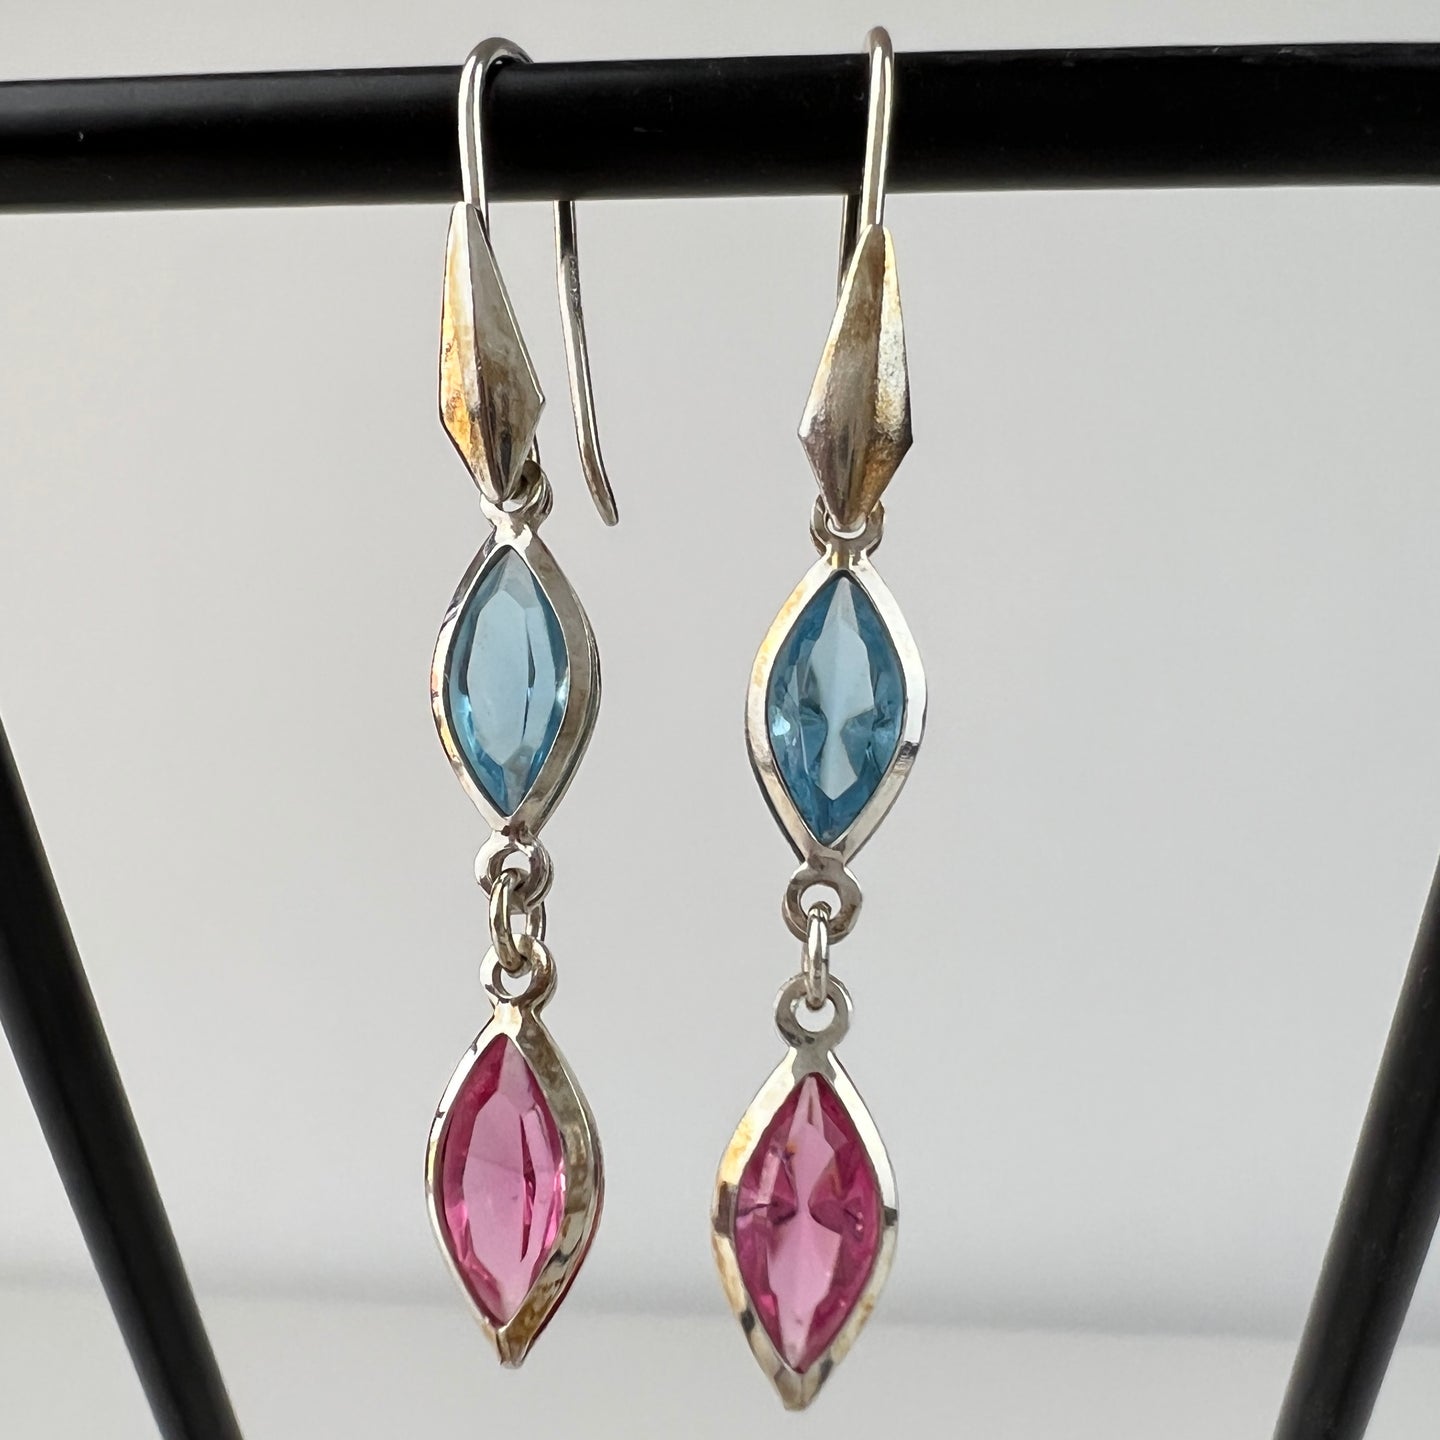 Vintage Italy 925 Dangle Drop Earrings Pink & Blue Colored Glass